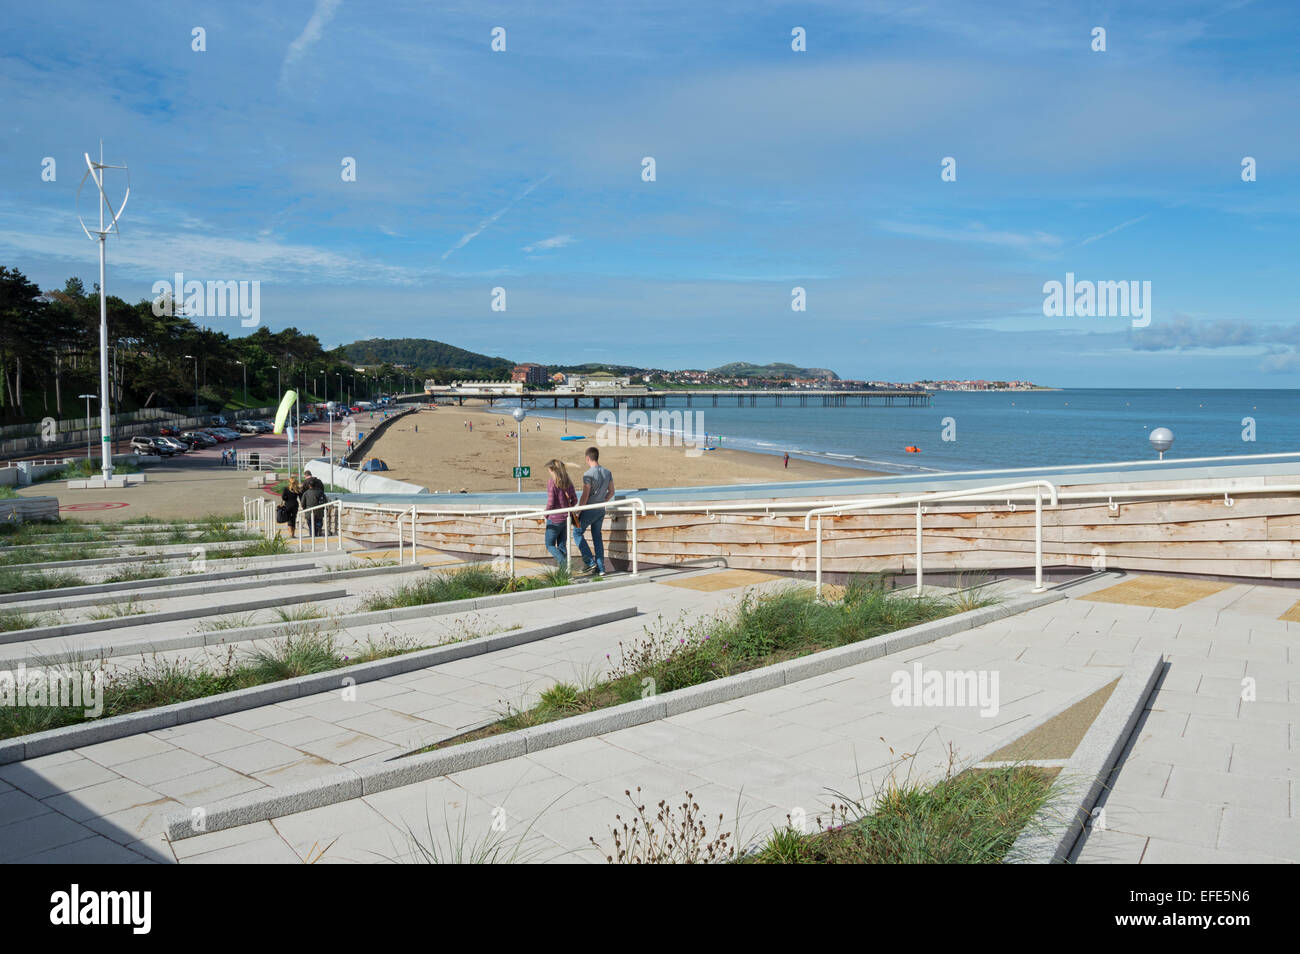 Rhos on sea, Colwyn Bay, seafront, beach, North Wales, uk Stock Photo